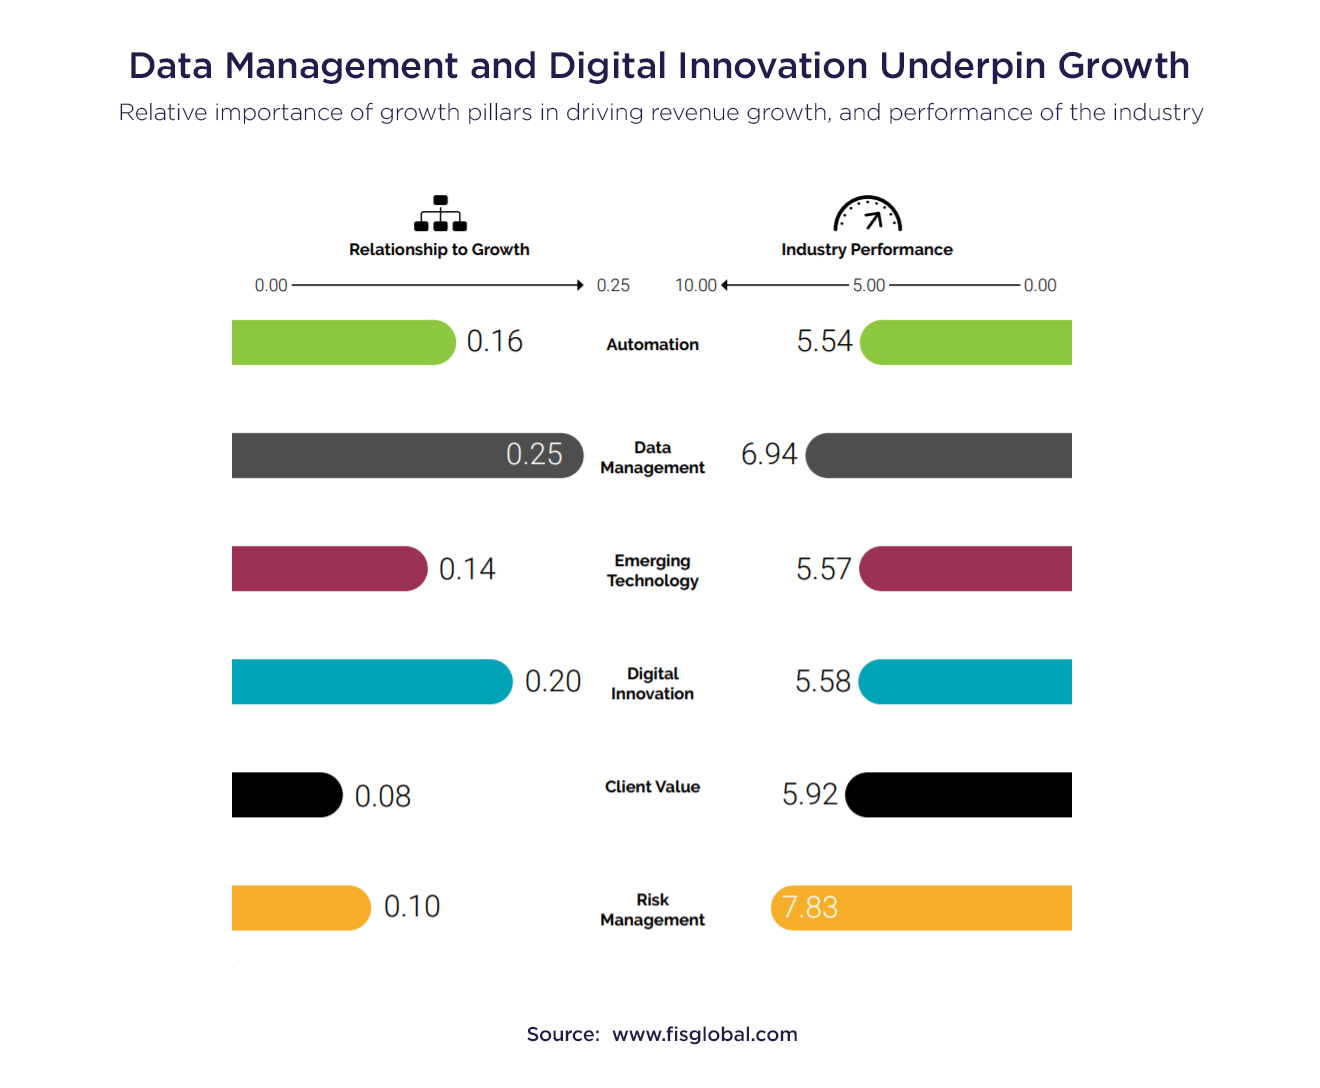 Data Management and Digital Innovation Underpin Growth